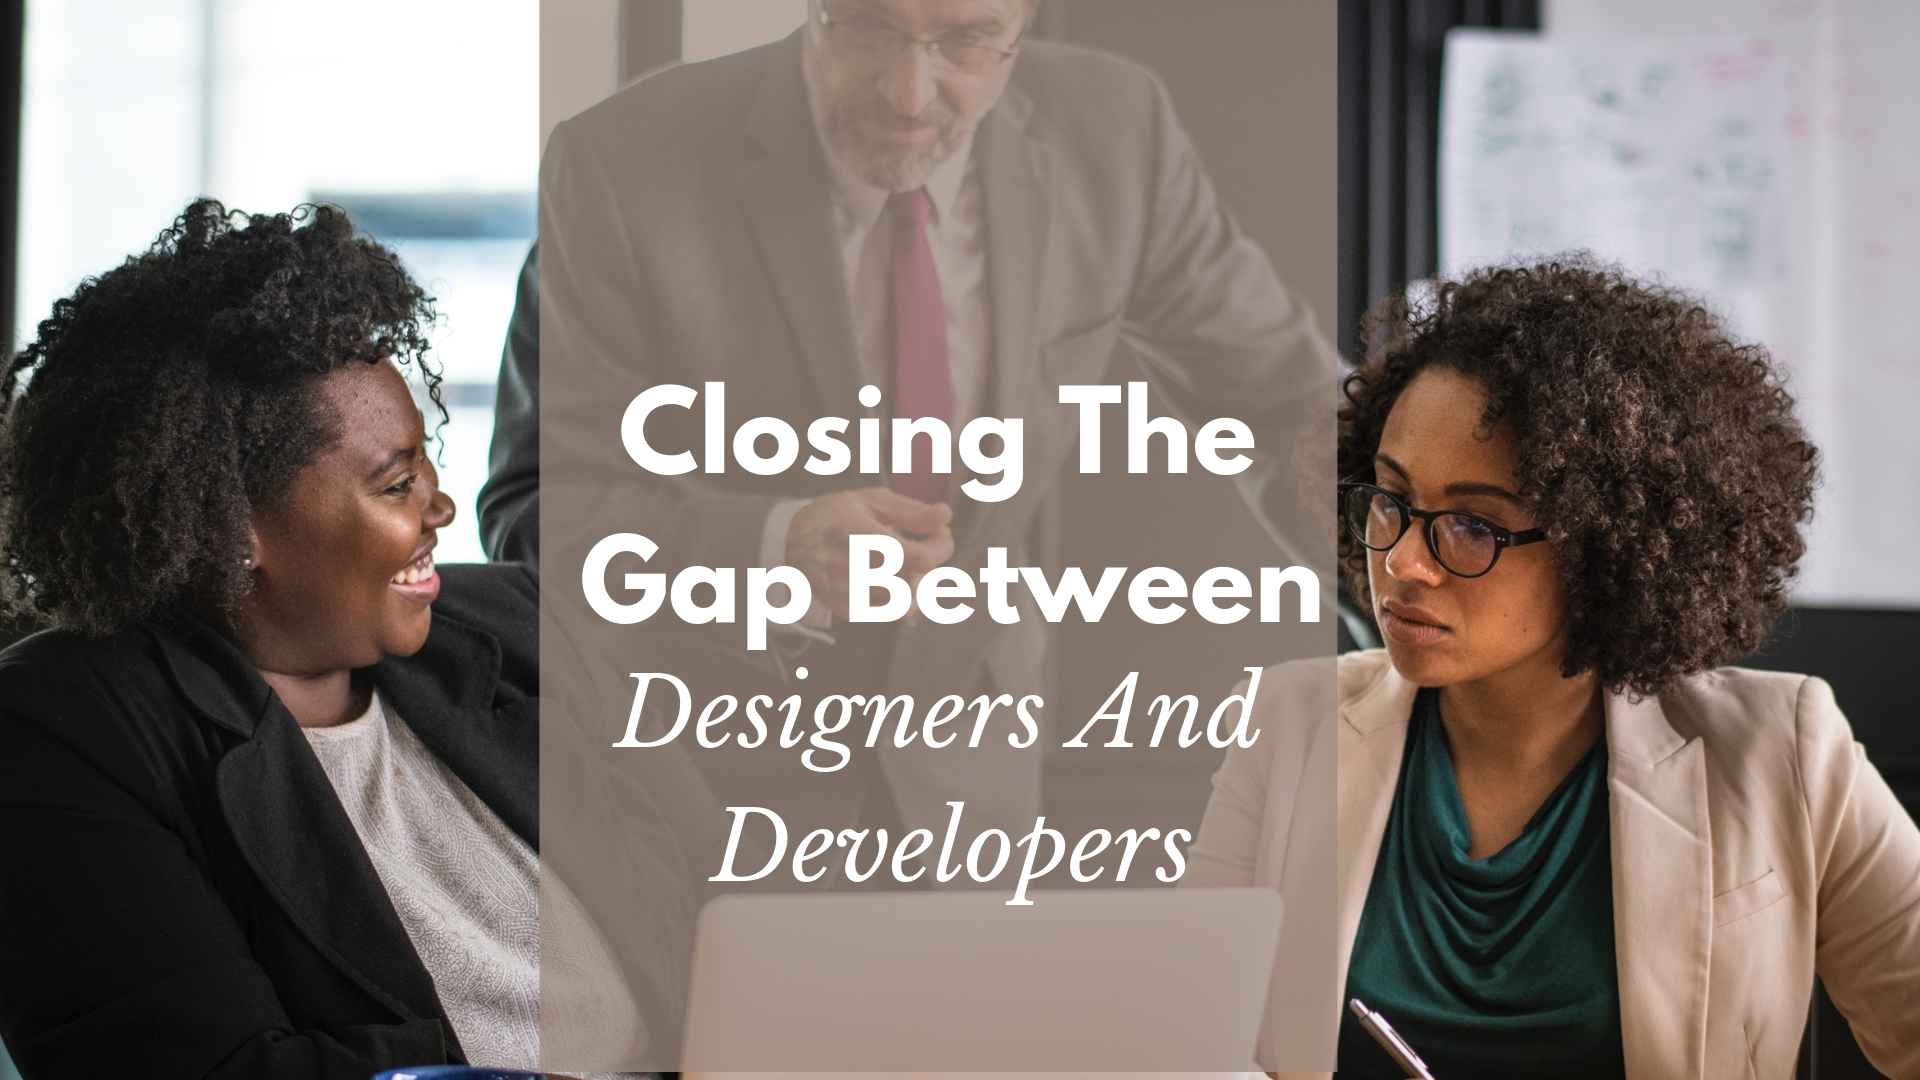 Closing The Gap Between Designers And Developers